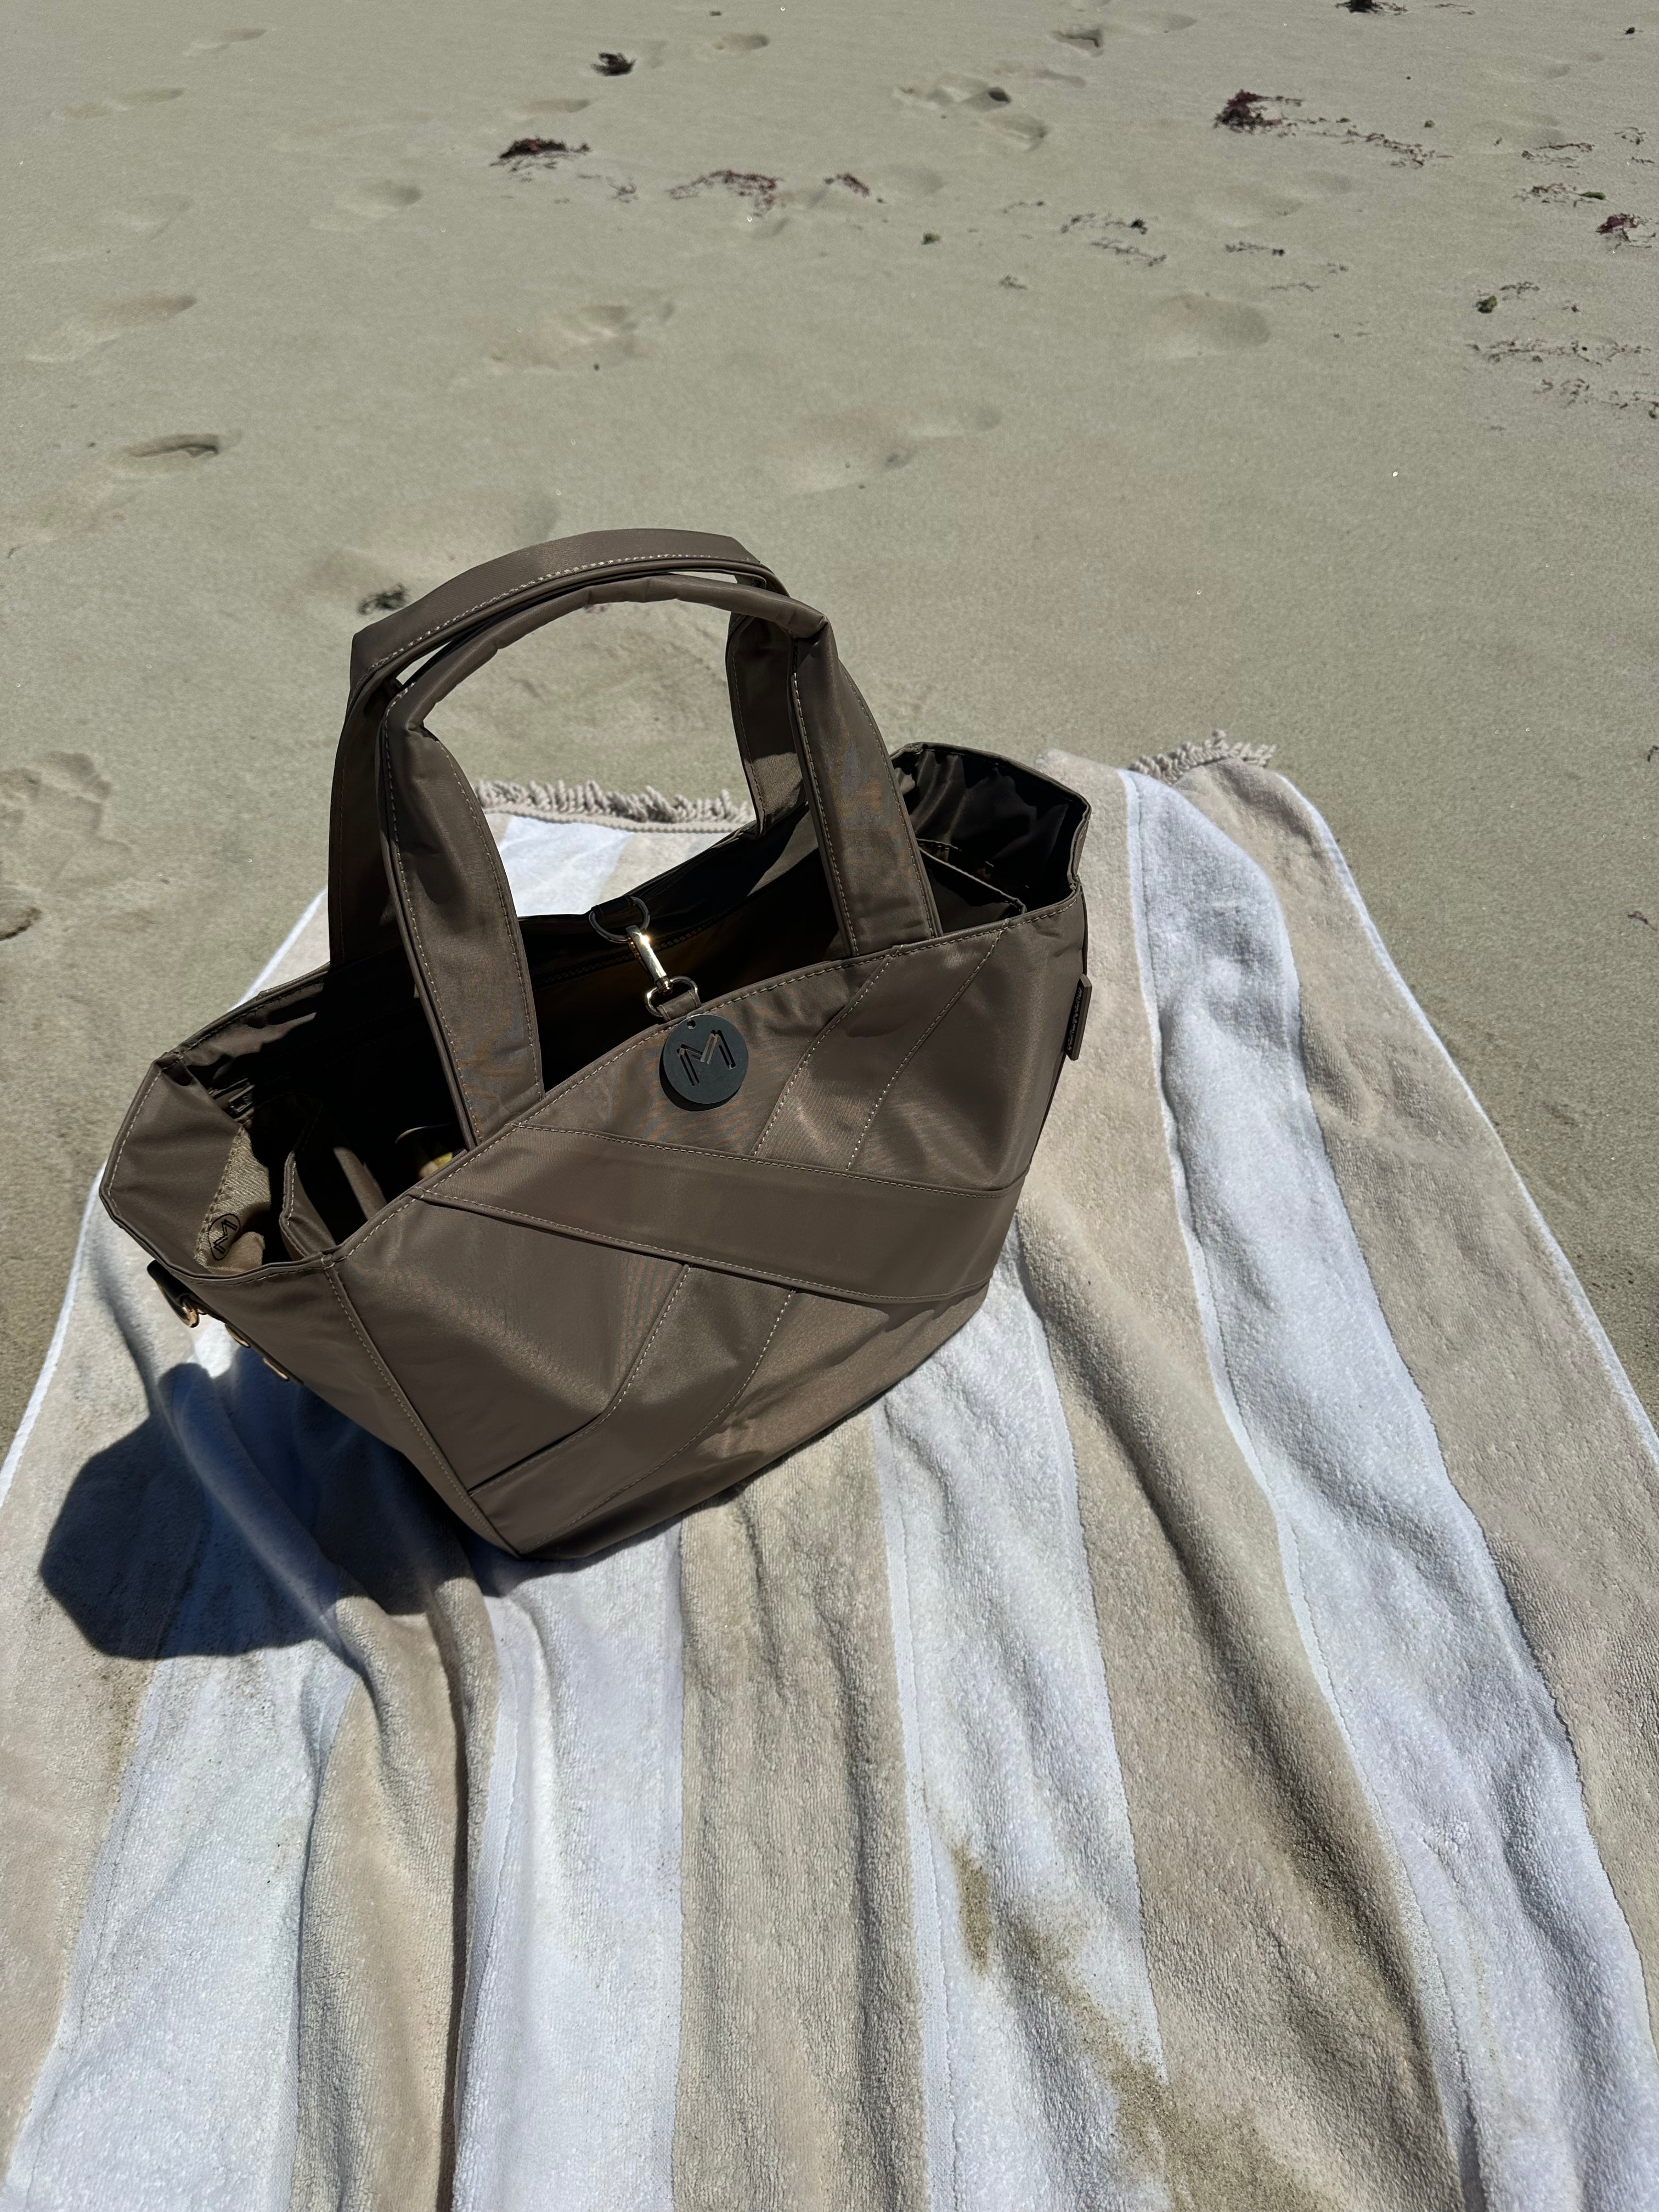 Cove Traveller ➕ - Sand (Includes luggage sleeve)